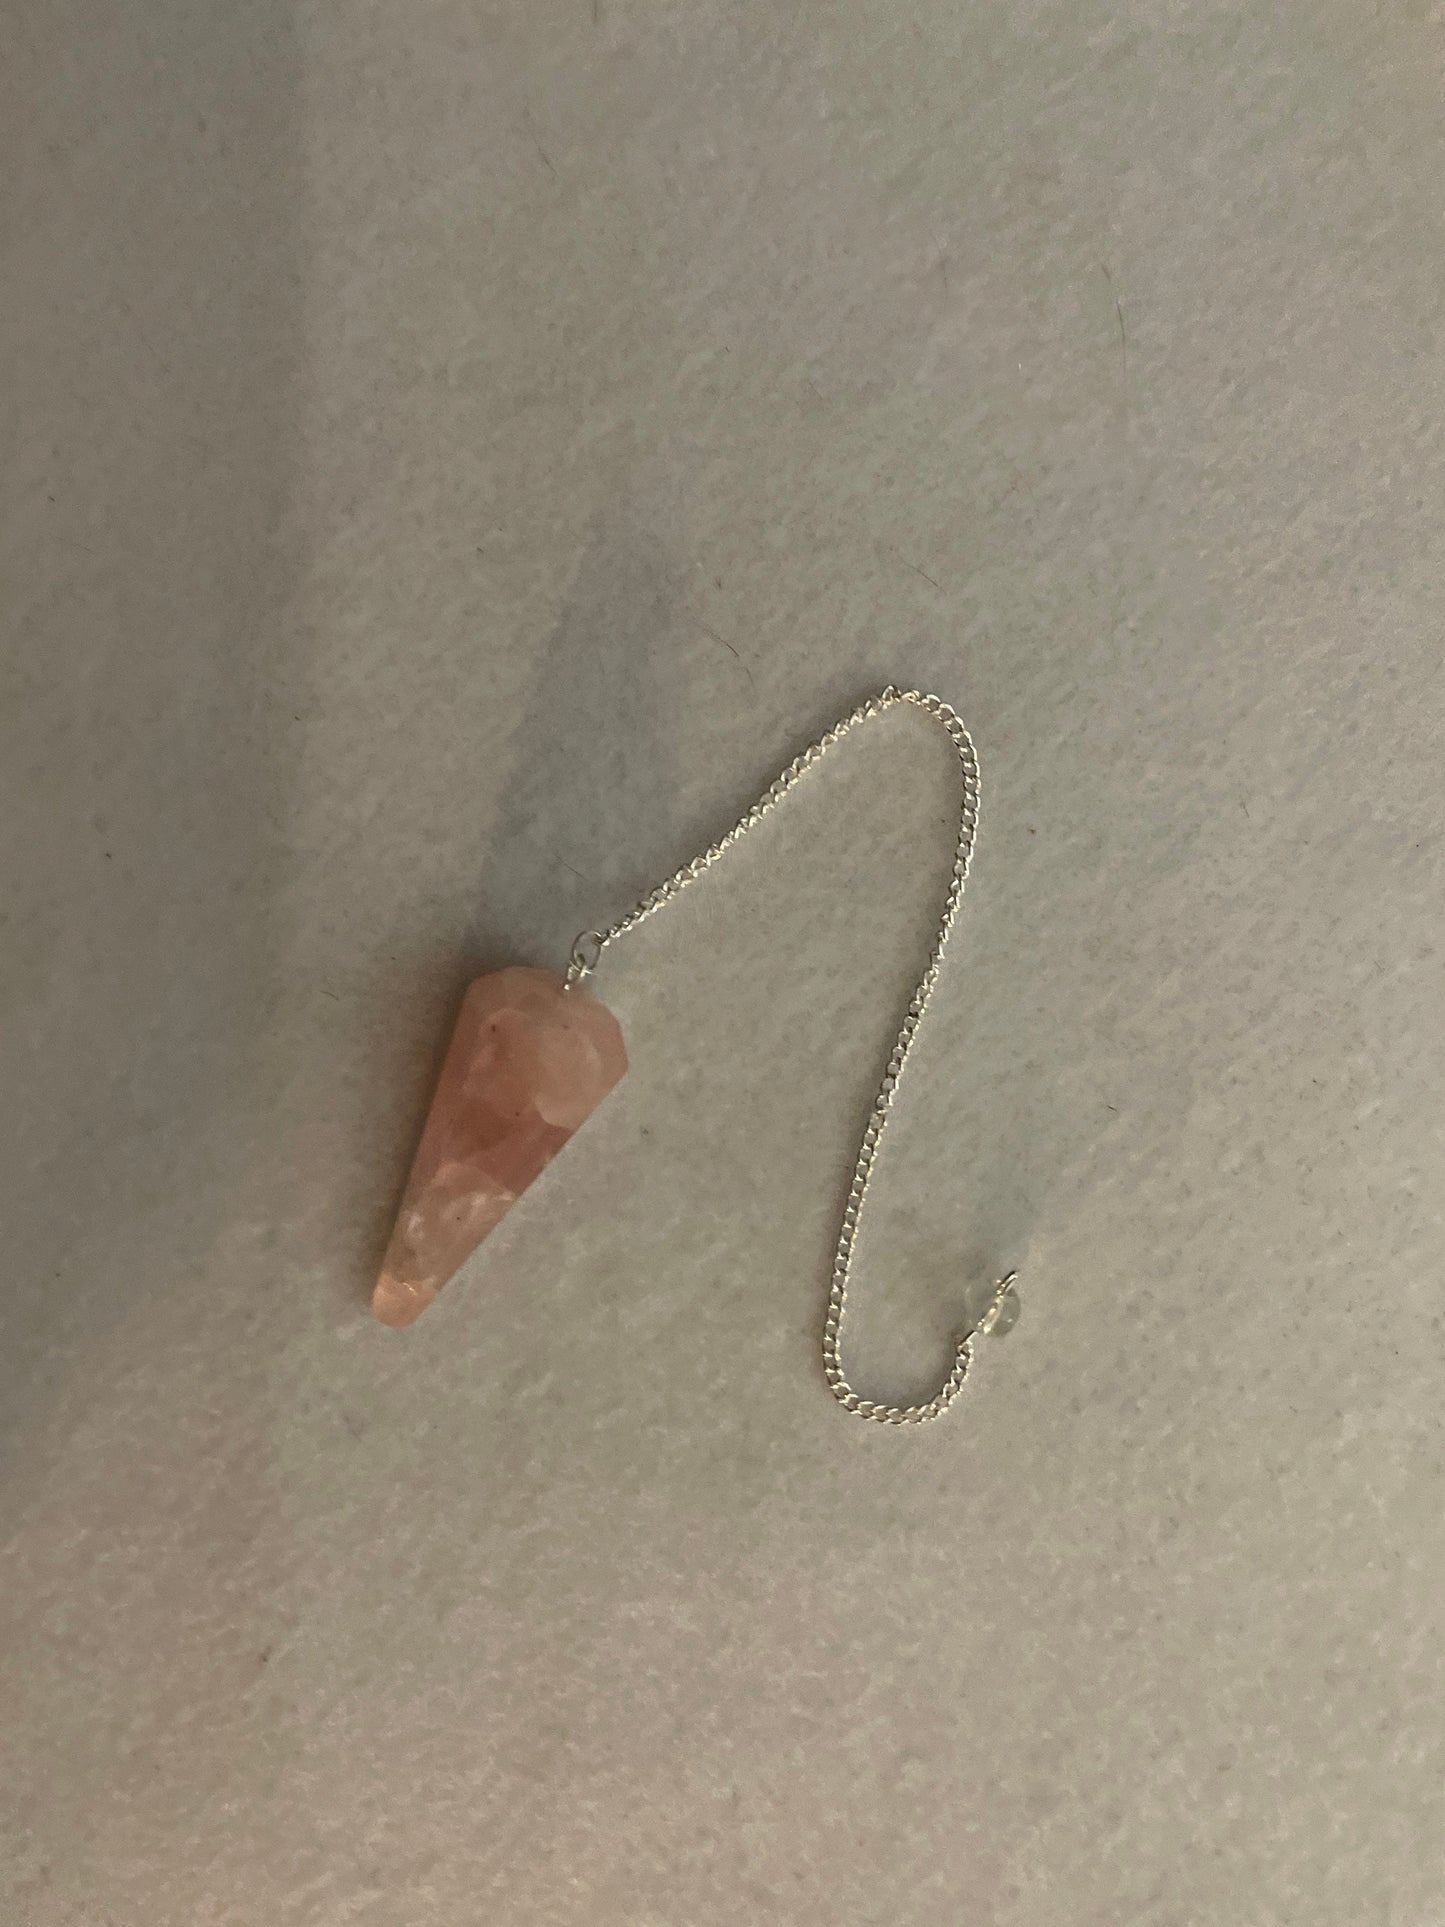 This beautiful Rose Quartz Pendulum is  1.75” and with chain is 8.25”